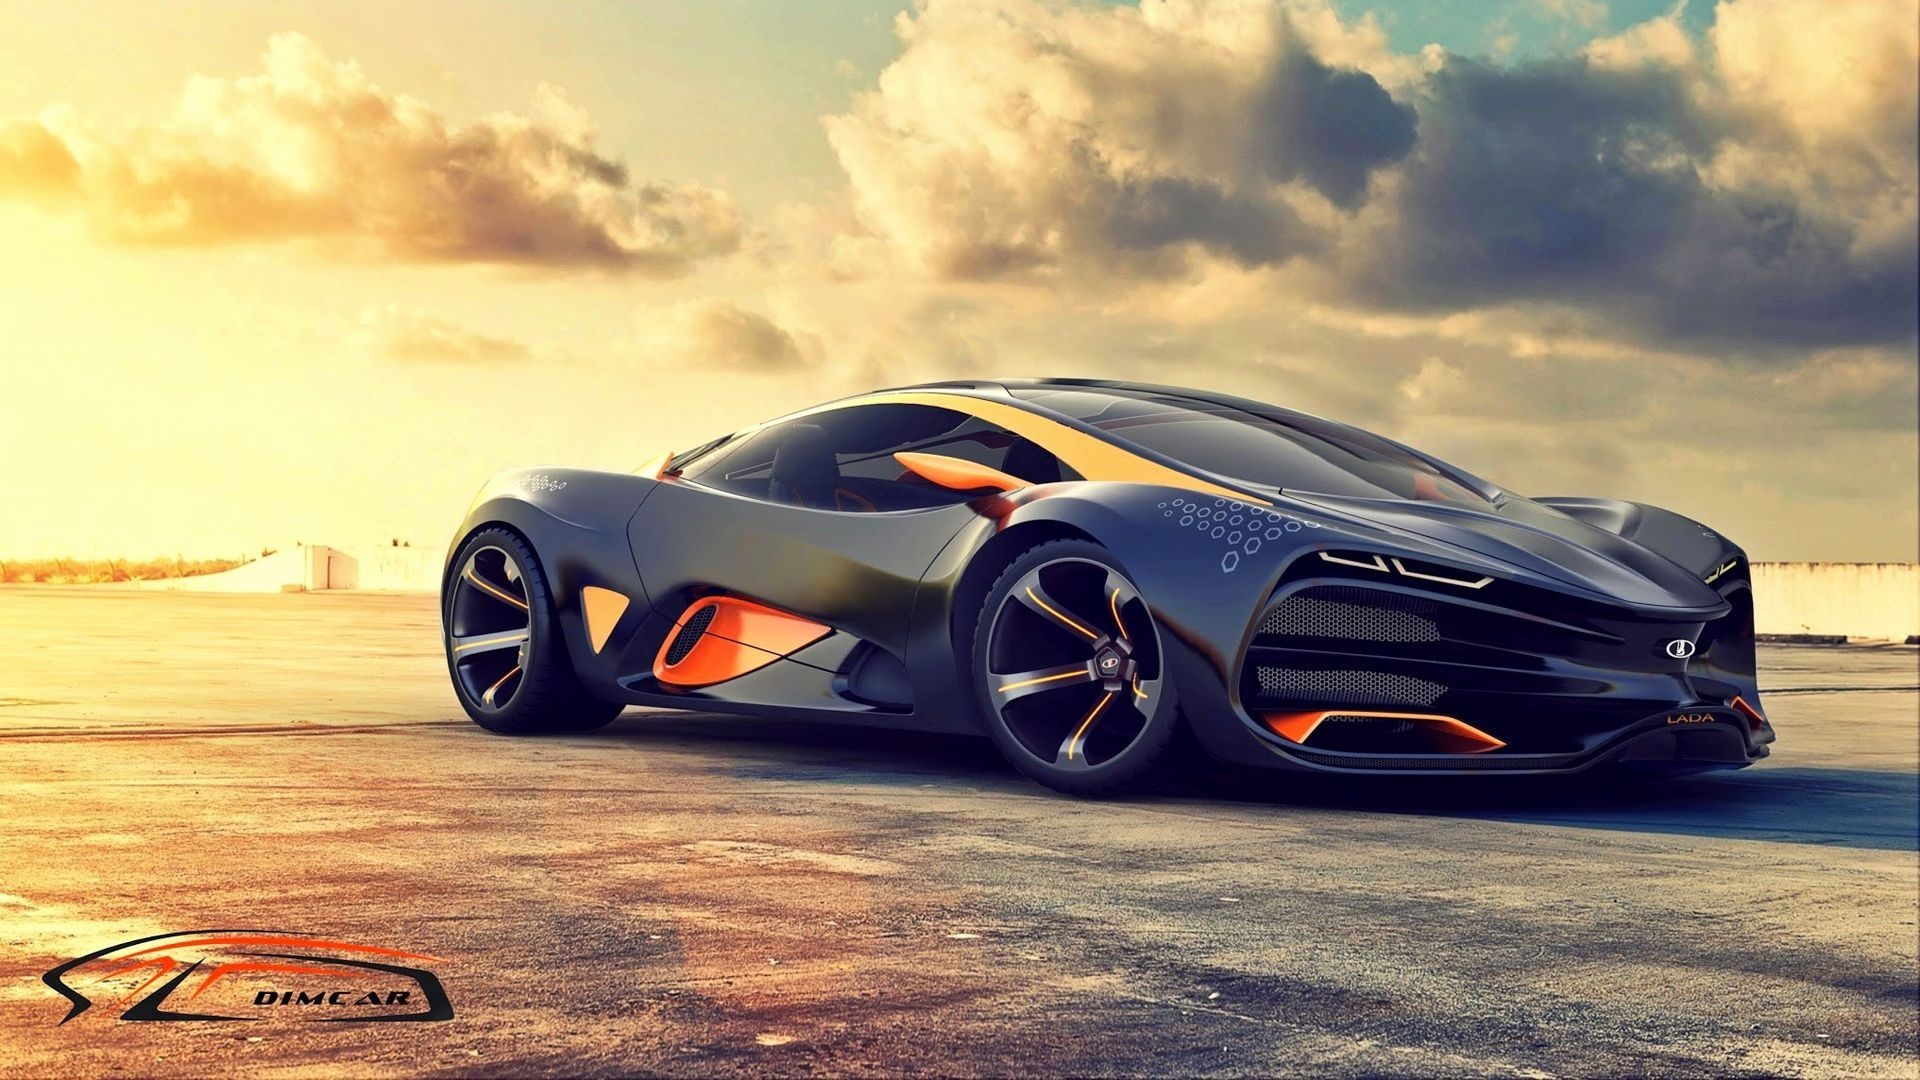 HD Awesome Cars HTC Wallpapers Background Wallpapes - High ...